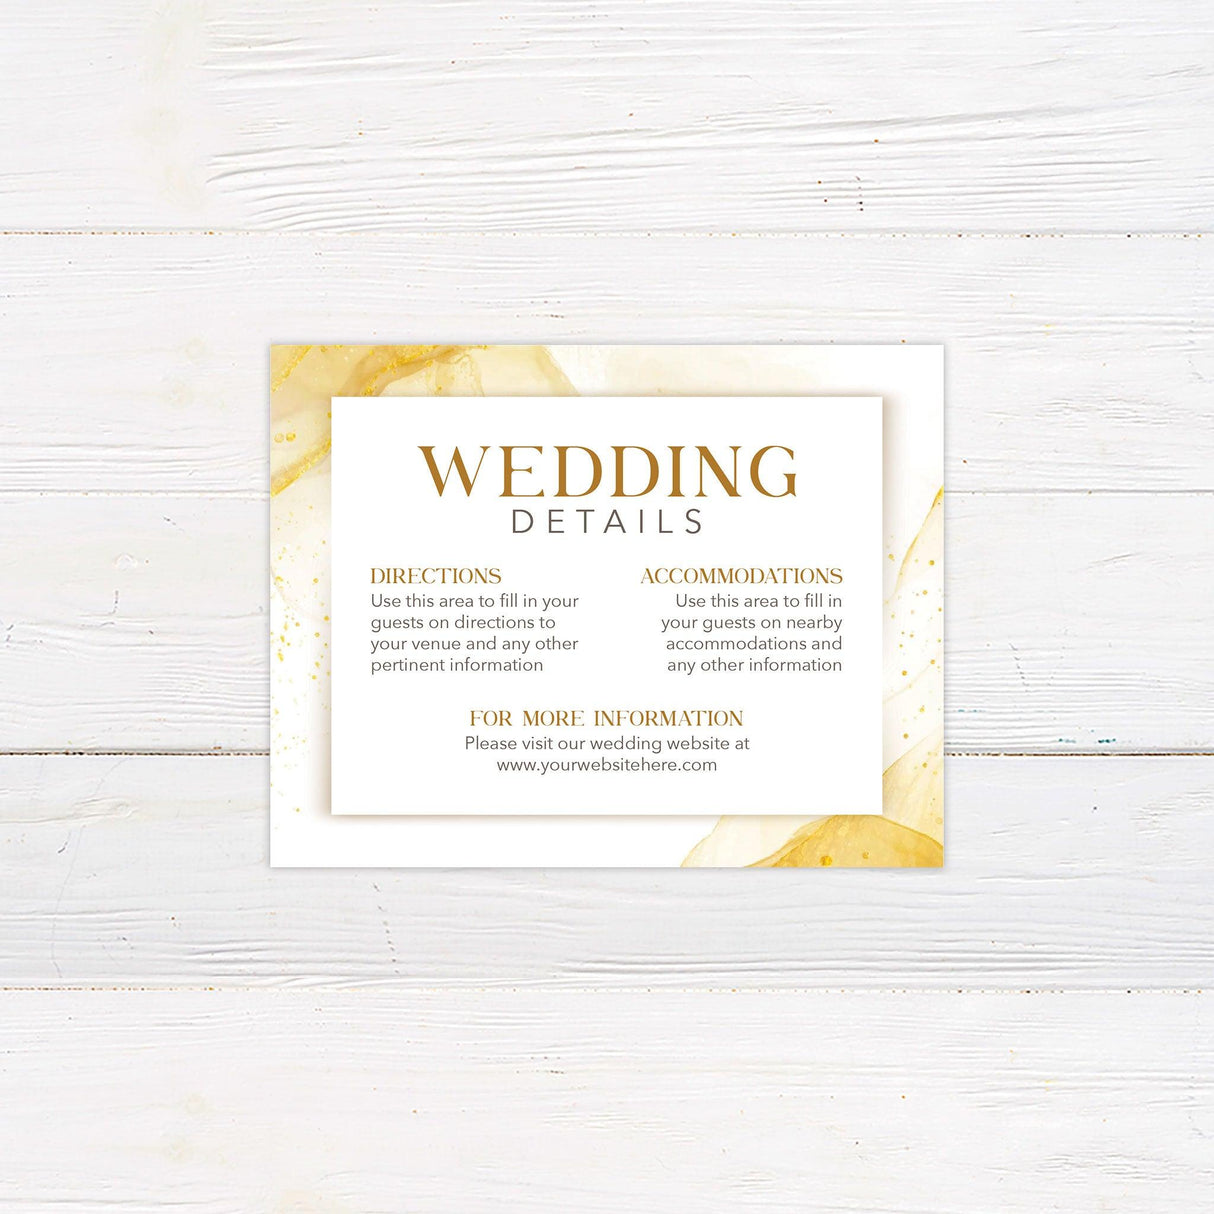 Abstract Gold Invitations - goprintplus